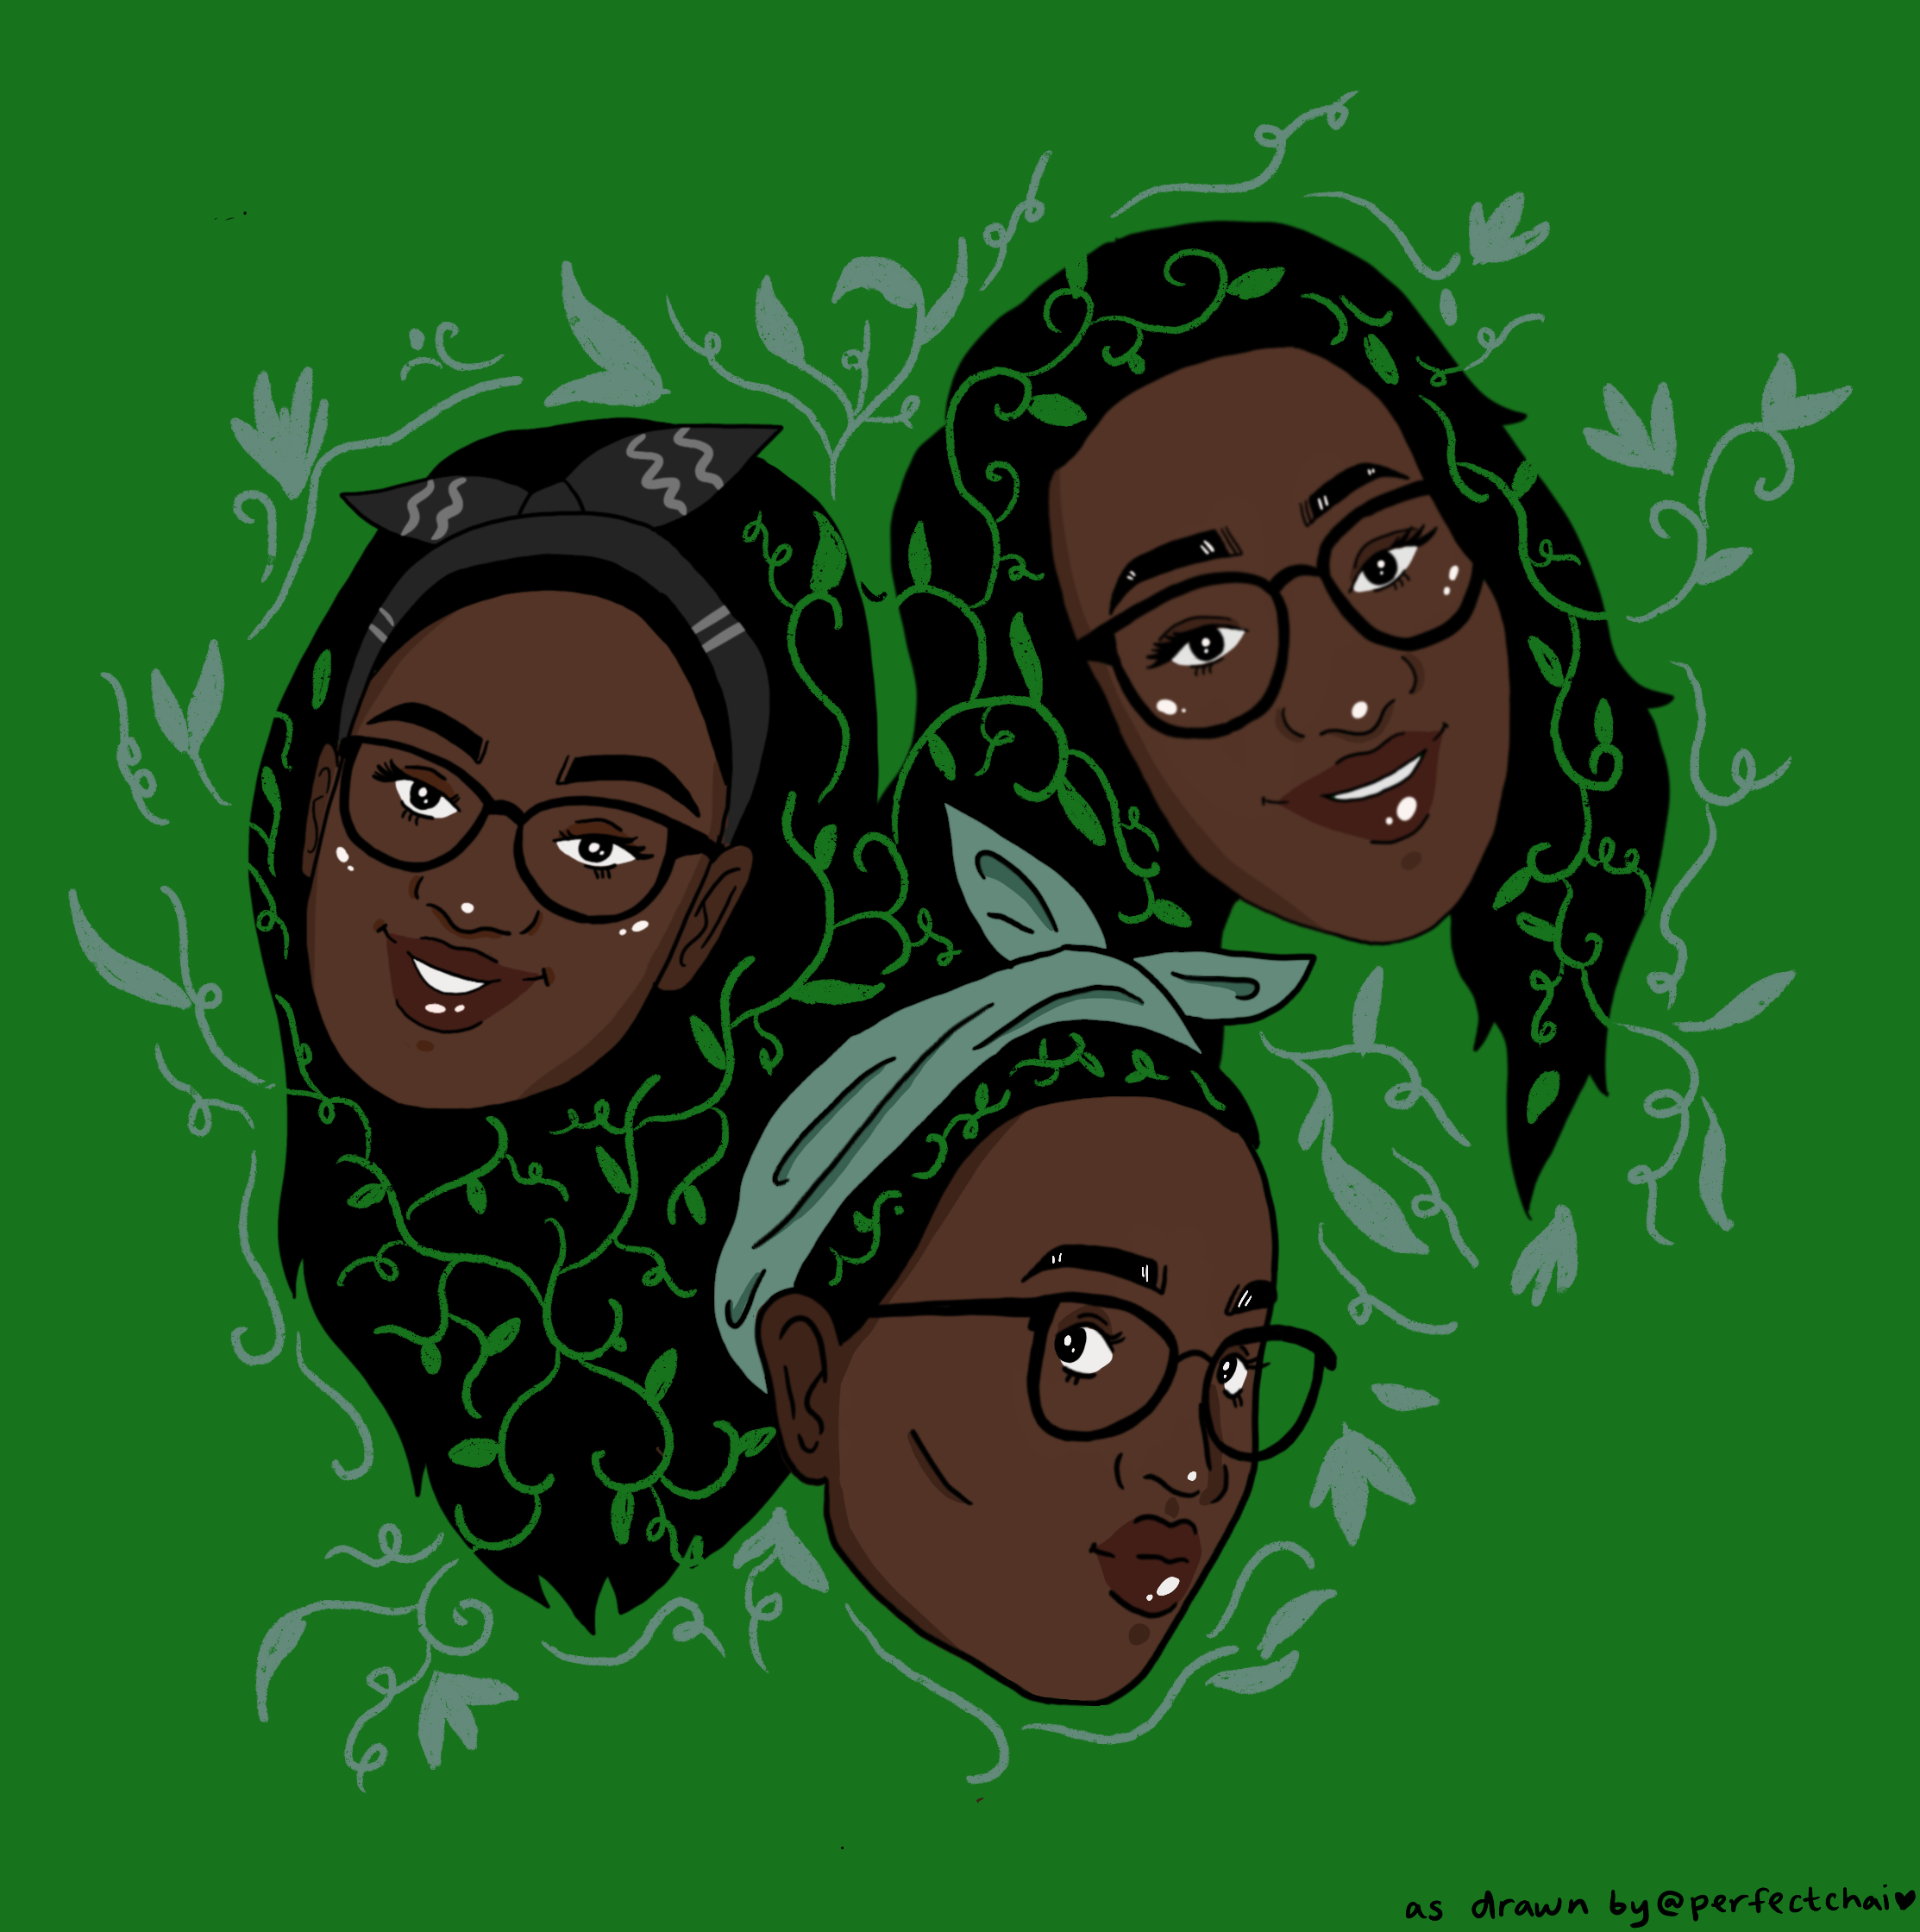 An Illustration of 3 women surrounded by vines and leaves